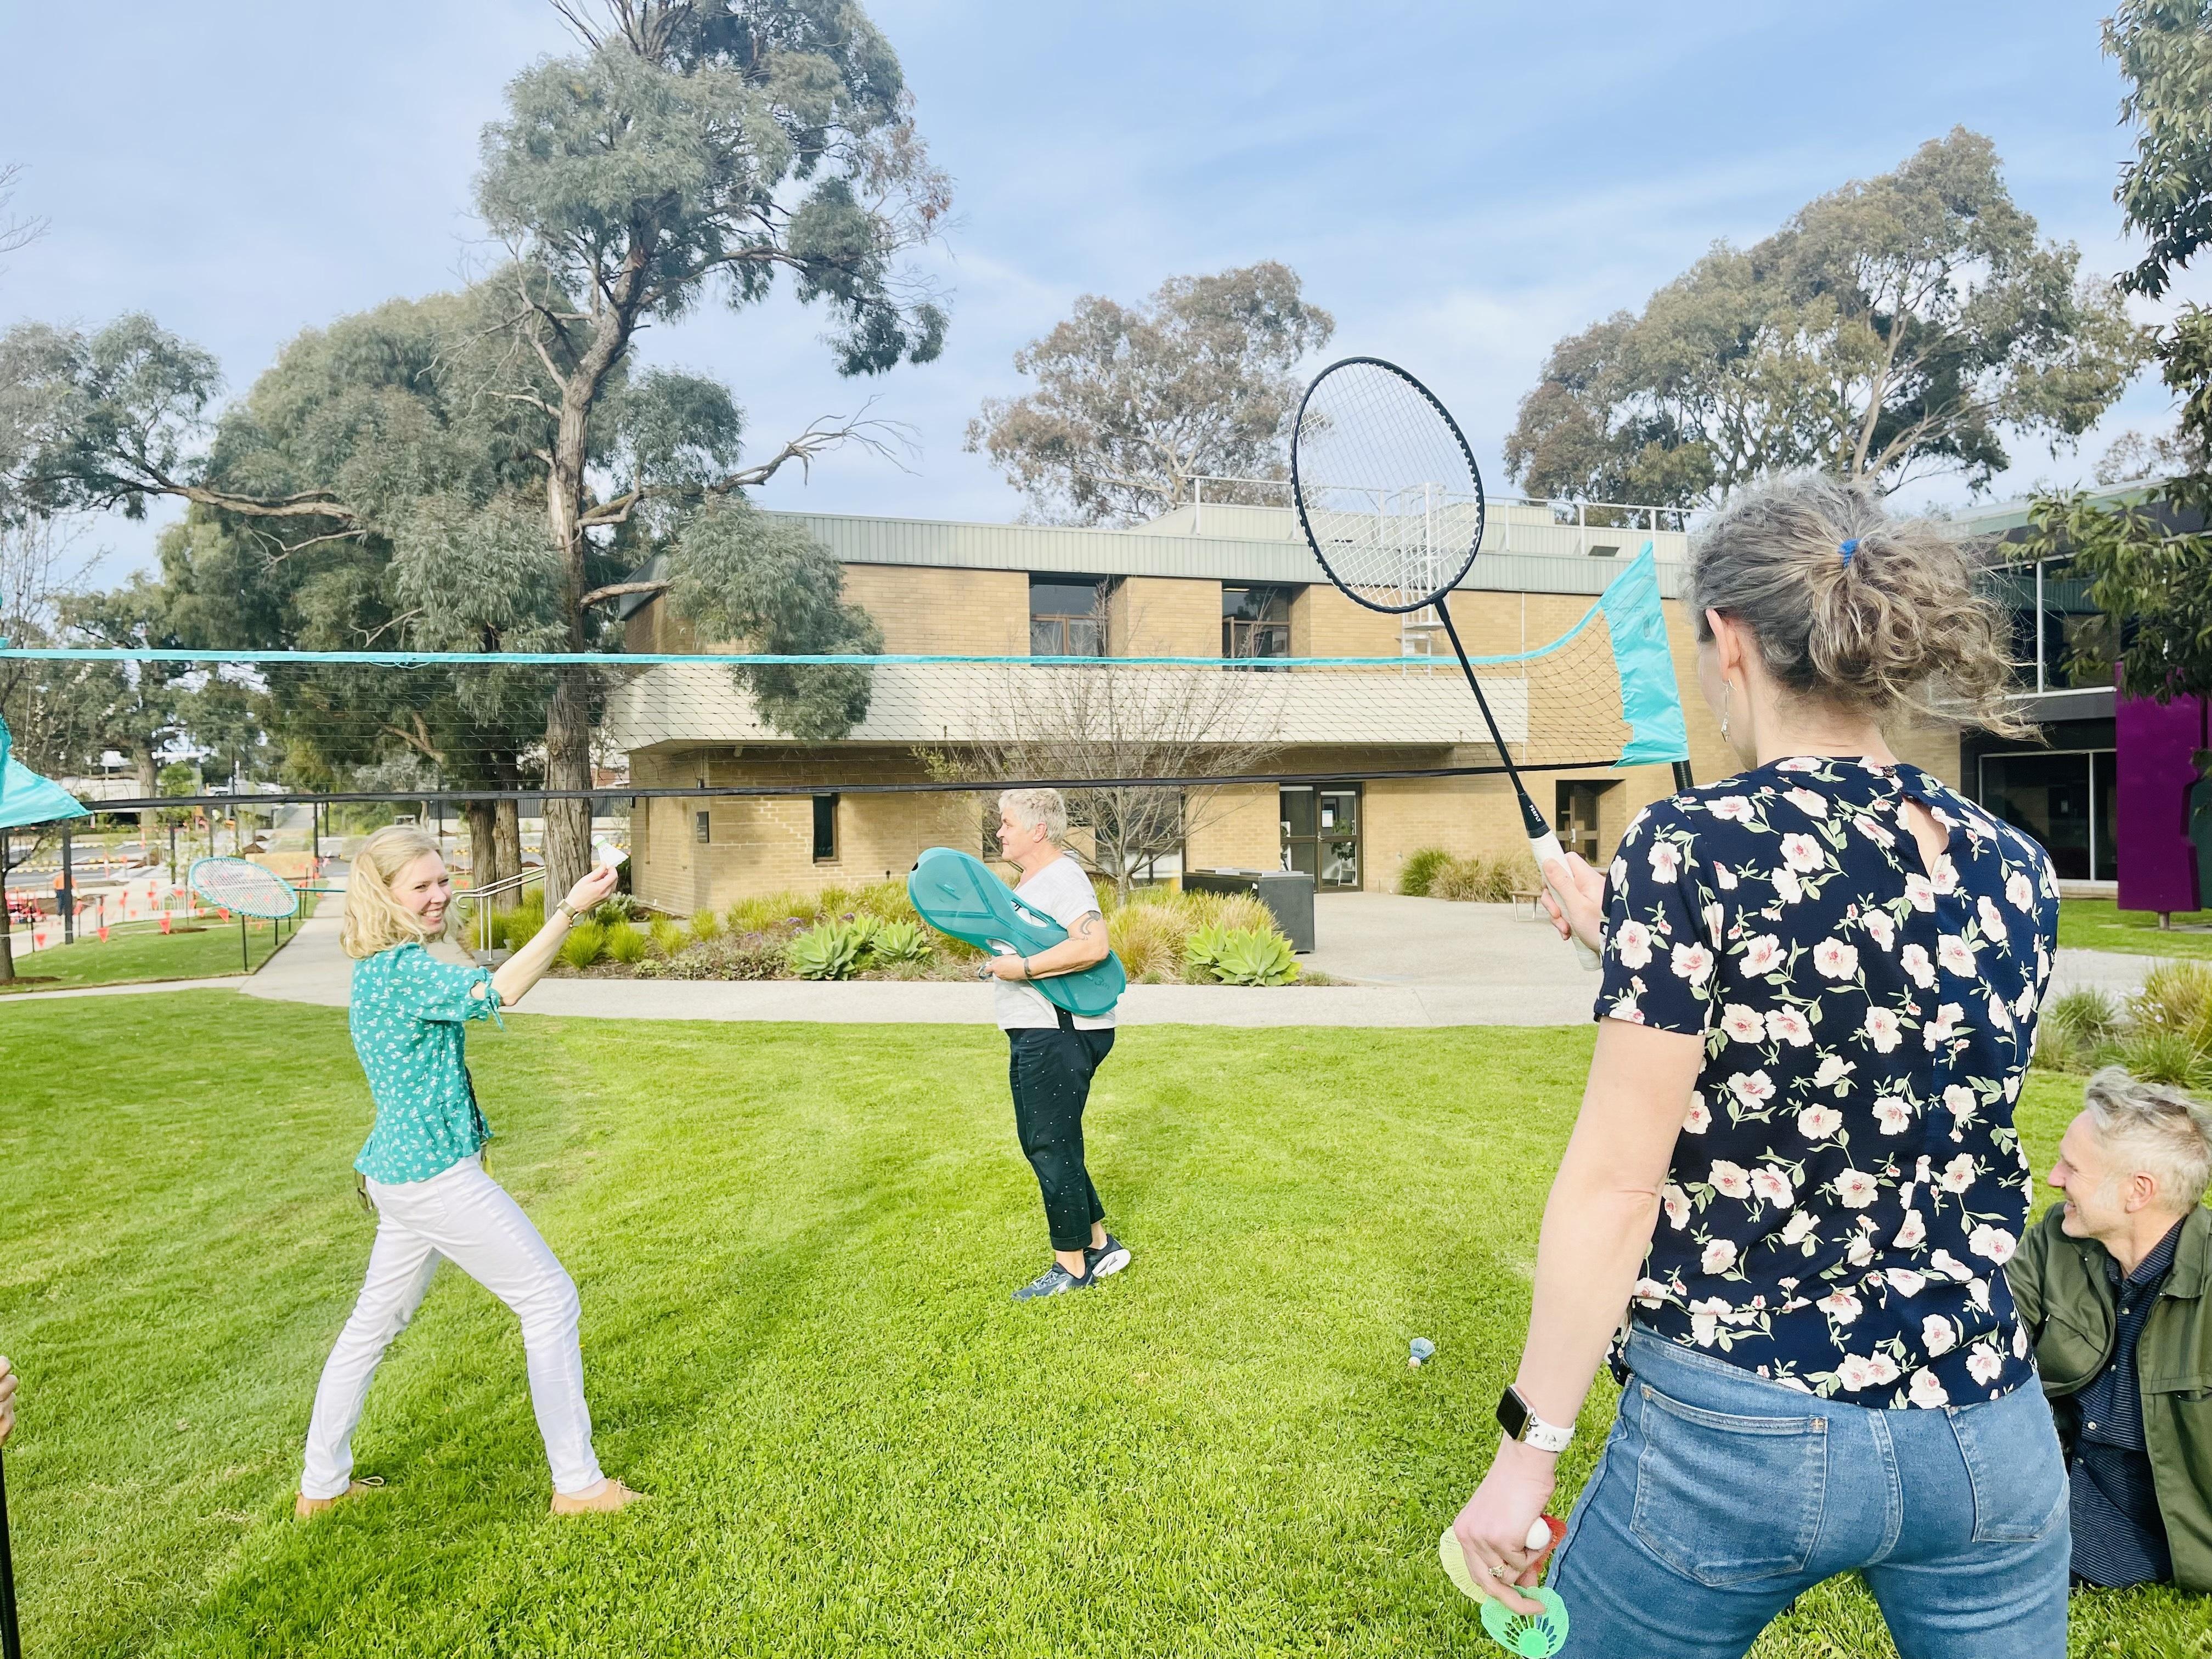 4 adults playing outdoor badminton in a park